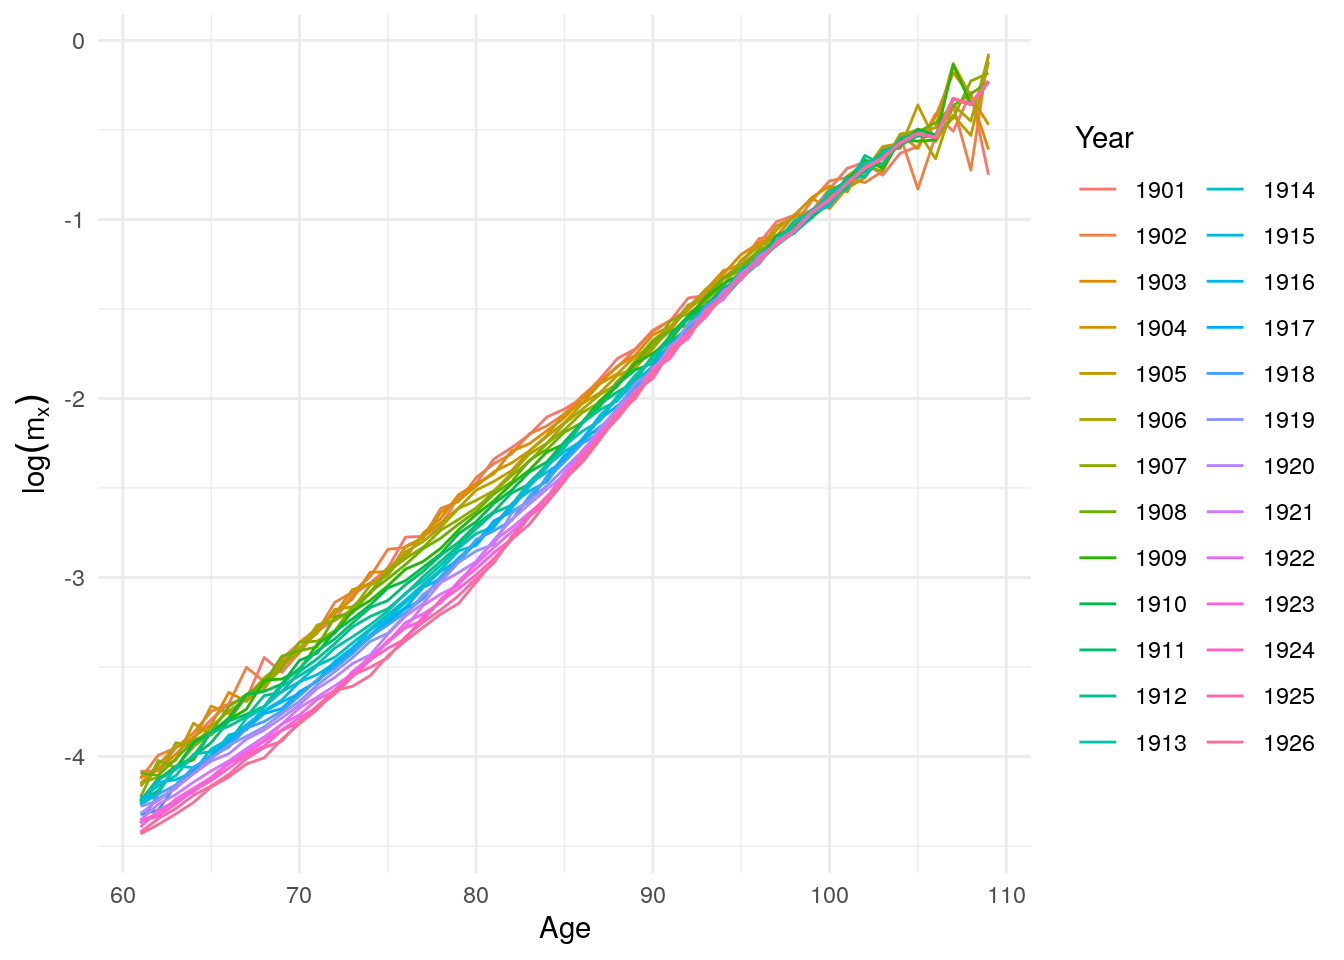 Log mortality rates above age 60 after 1900